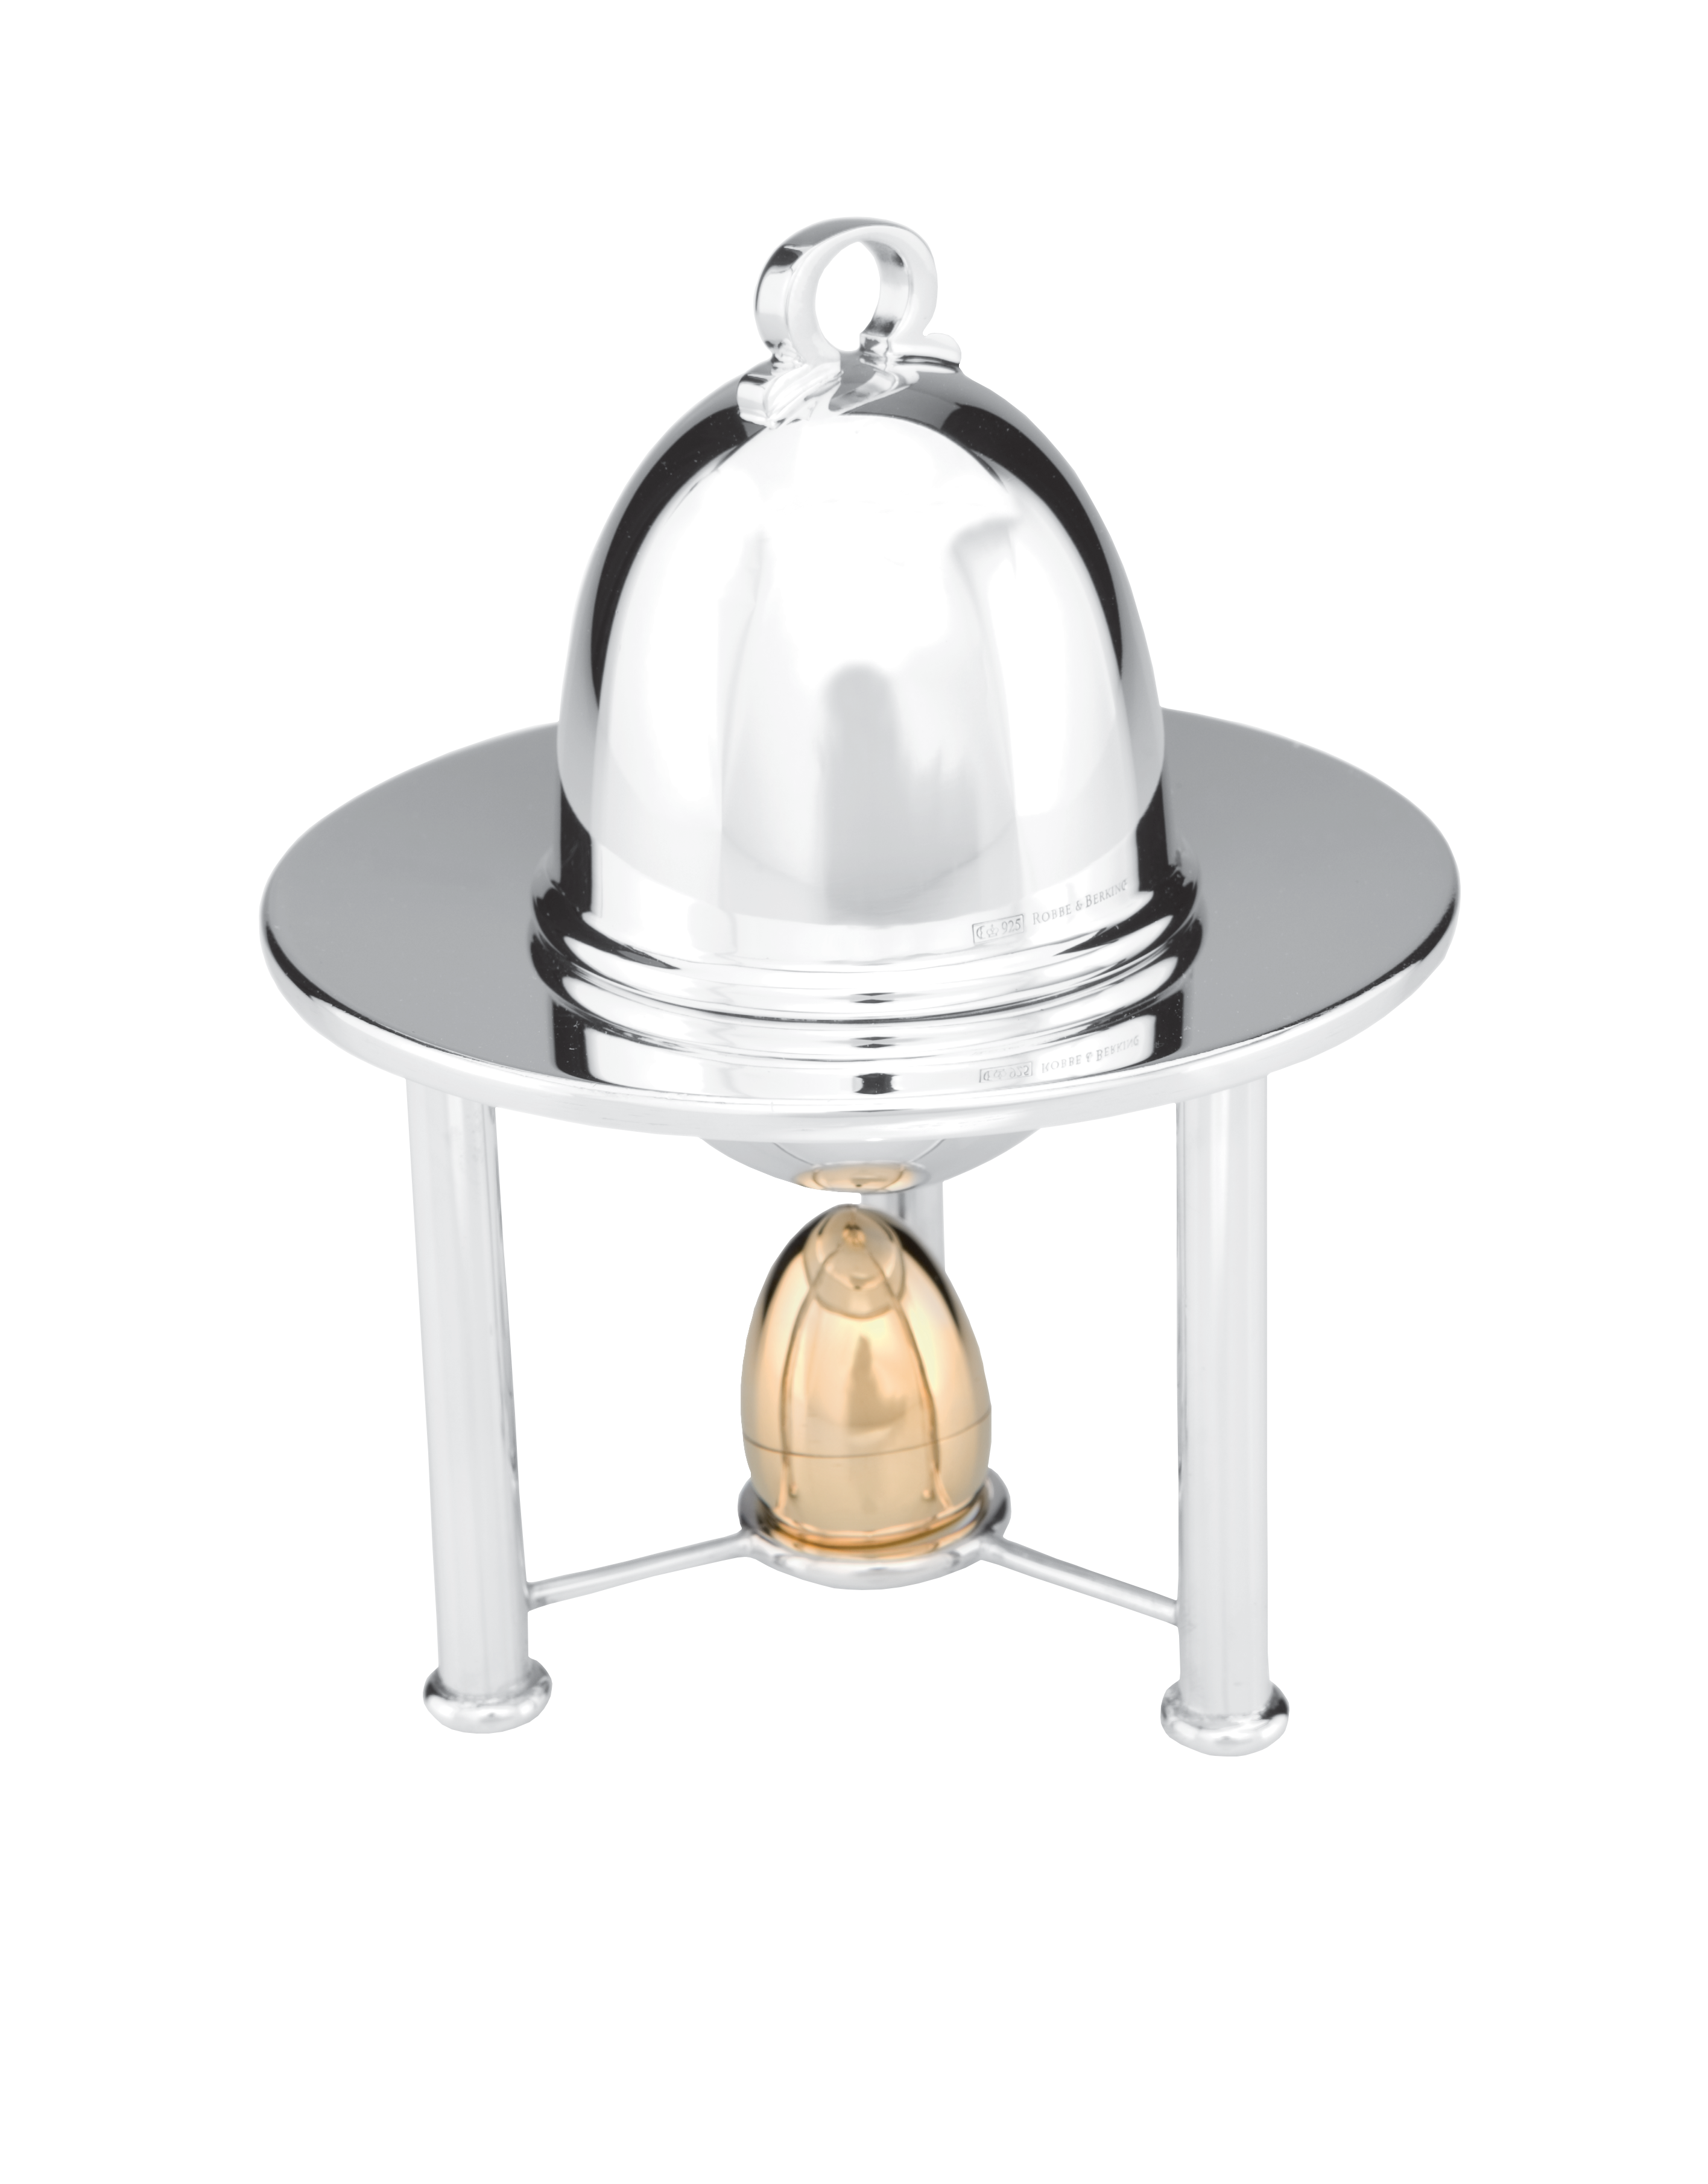 Covered Egg-Cloche with Salt Shaker (925 Sterling Silver)